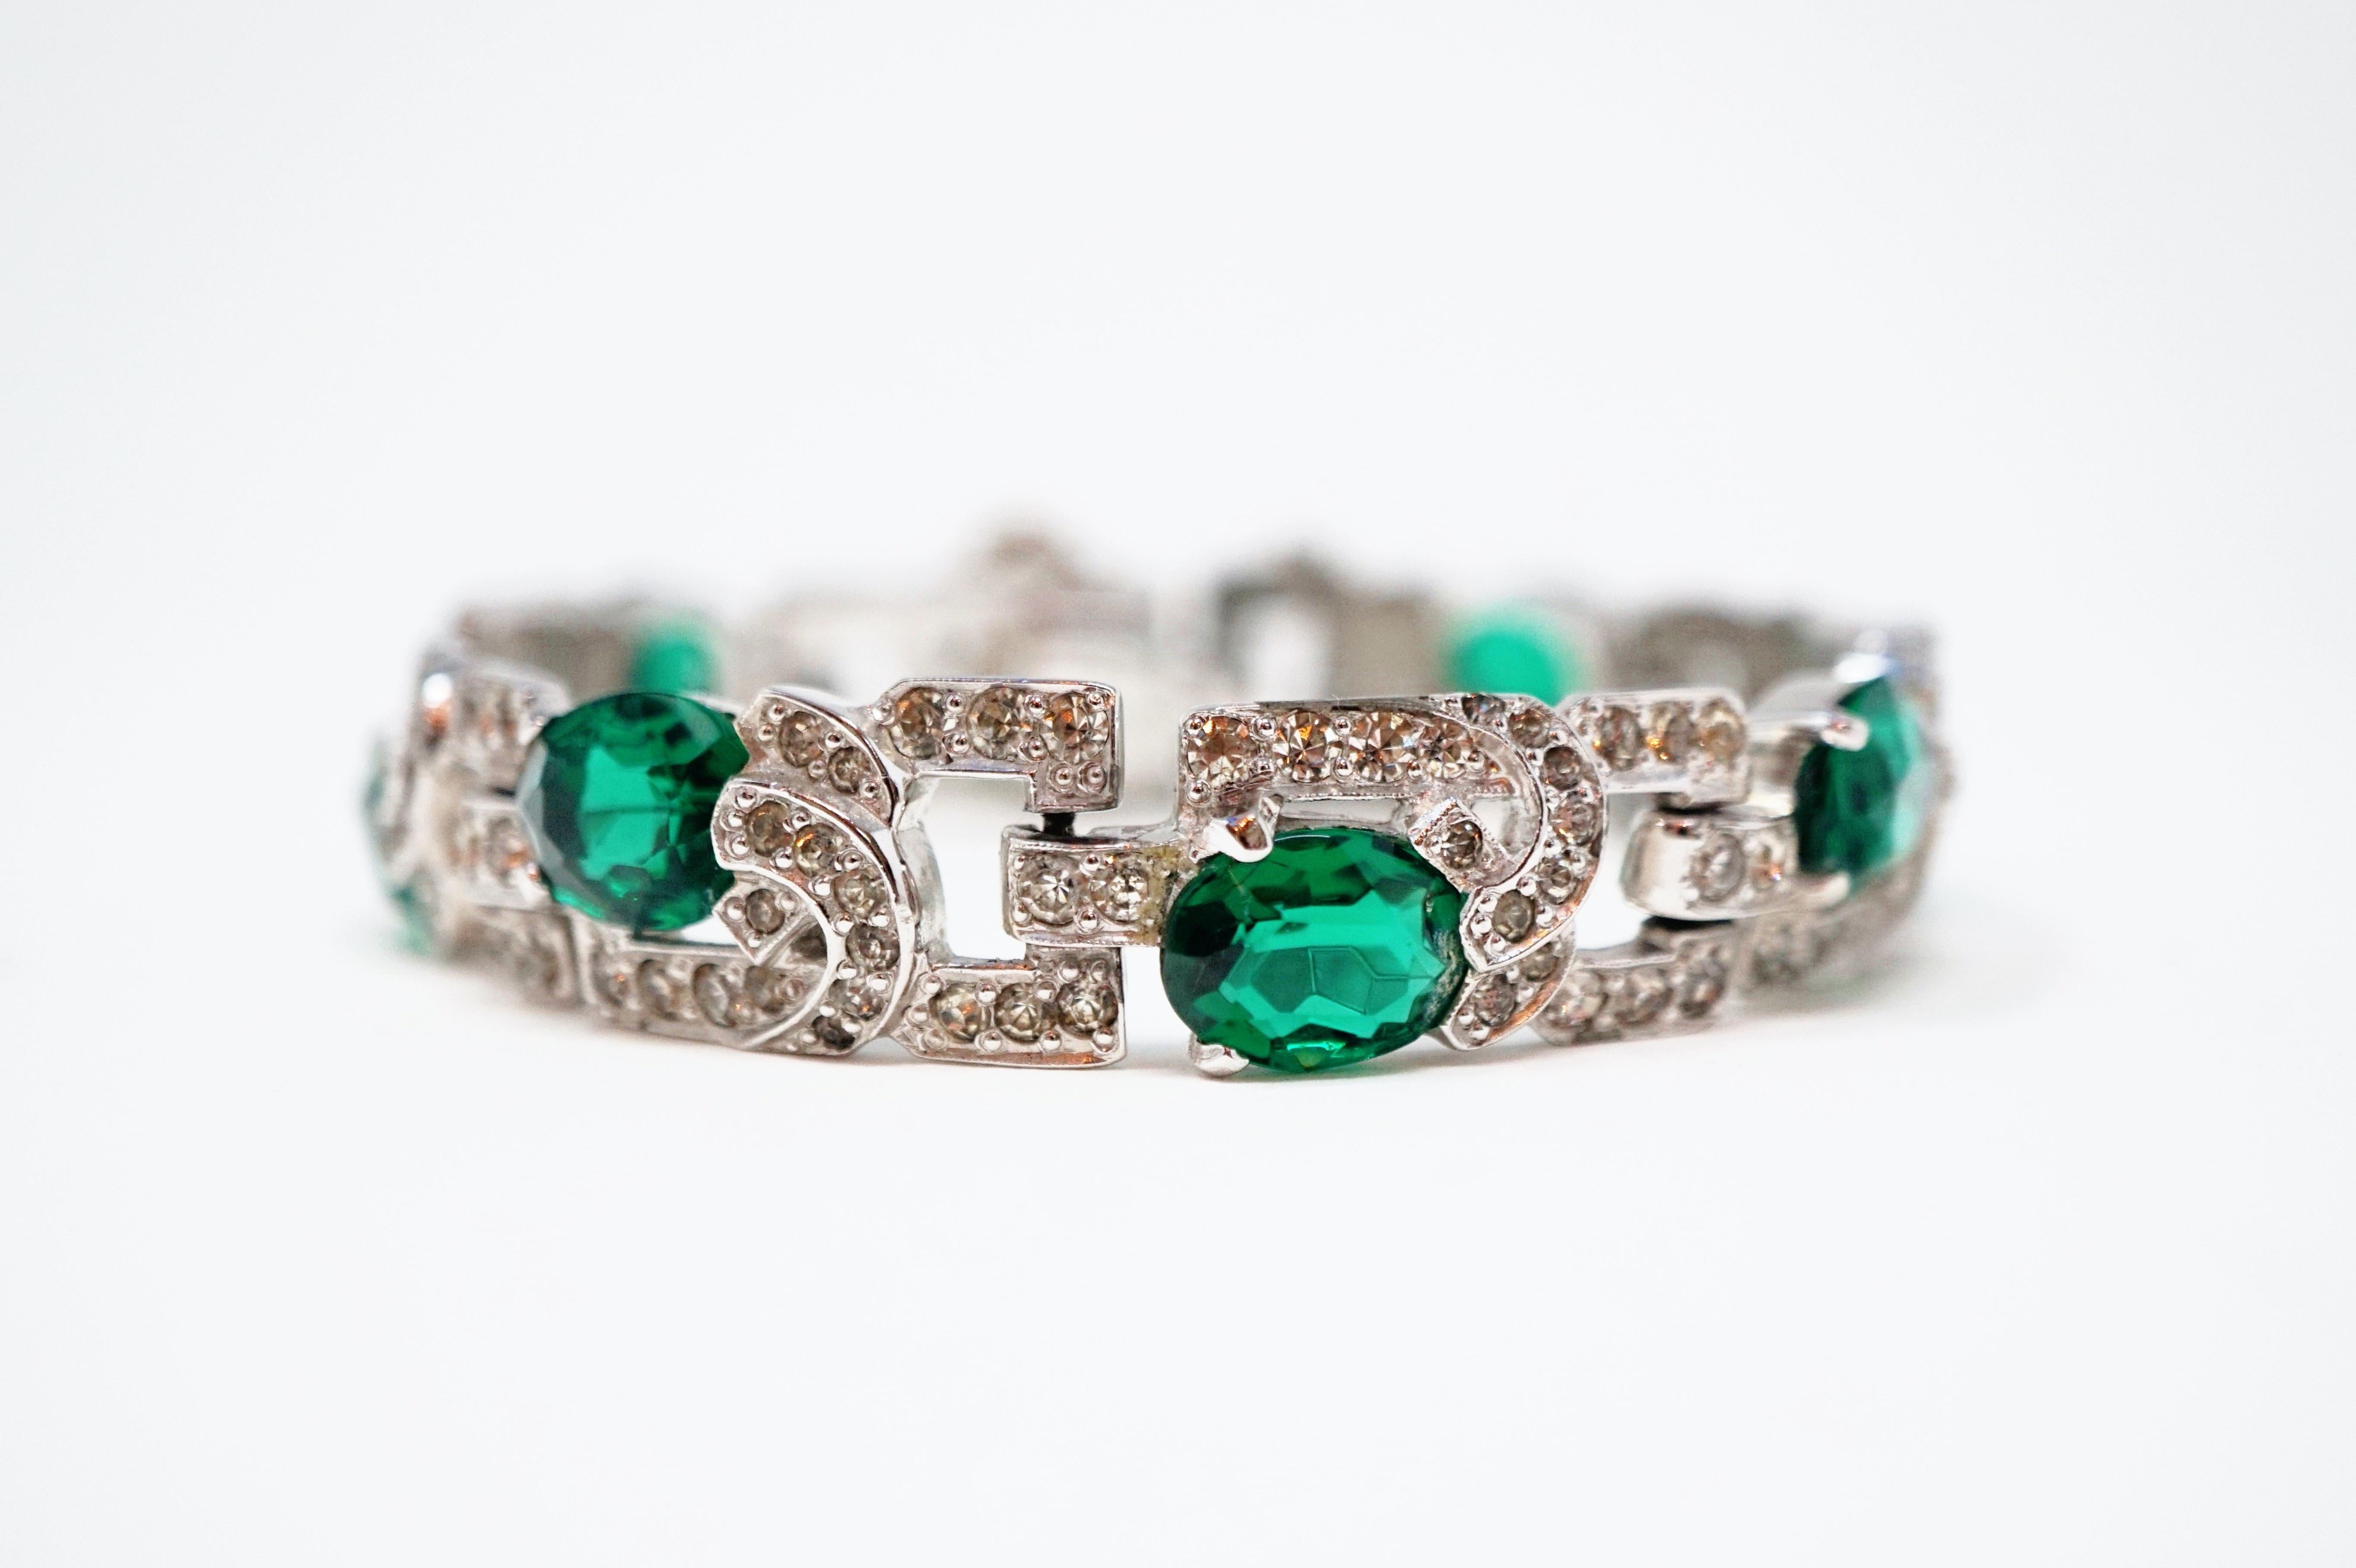 This absolutely breathtaking piece by Mazer Brothers, circa 1940s, is a true treasure from the past!  A classic art deco tennis bracelet is covered in shiny rhodium plate, studded with Diamanté crystals, and accented with oval Emerald-colored